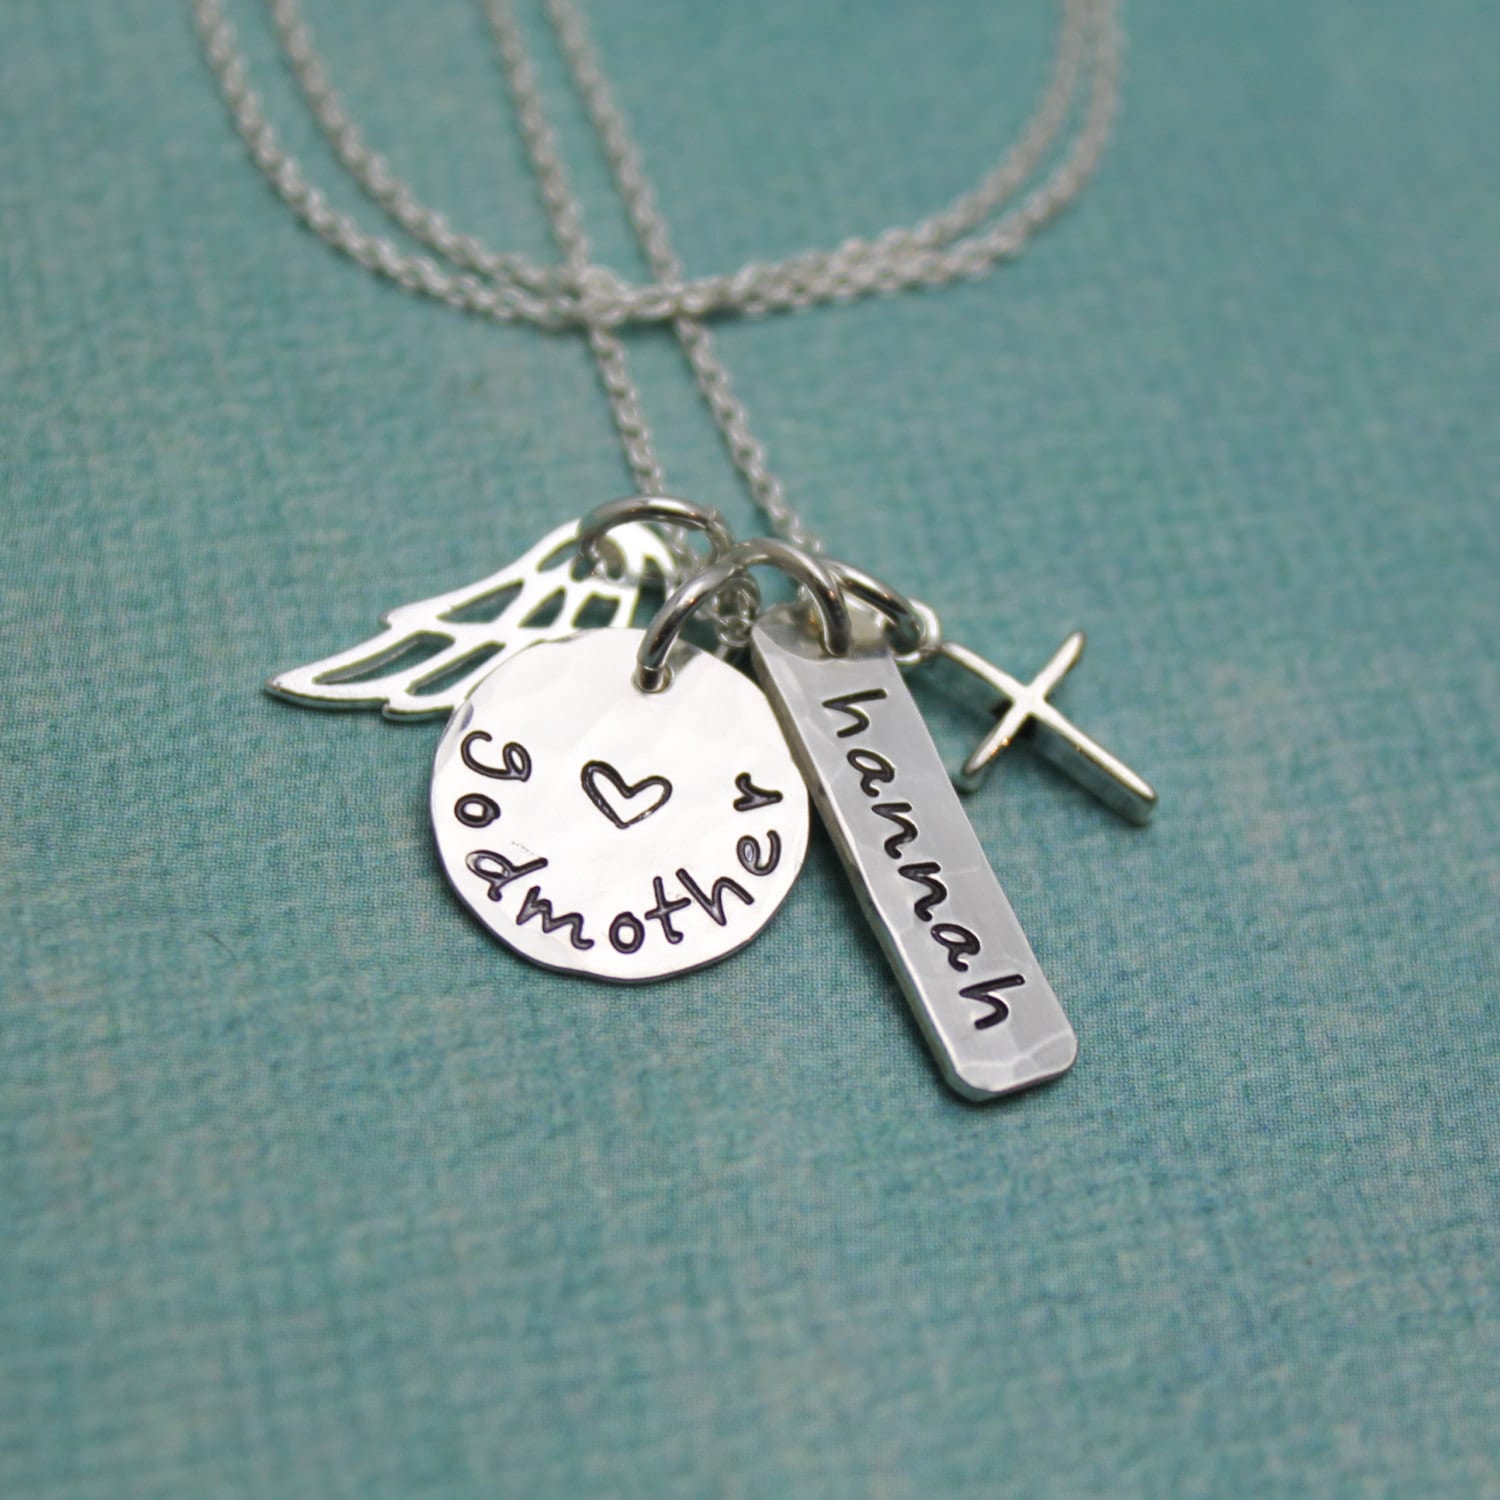 Godmother Necklace - Personalized and Hand Stamped - Cross and Angel Wing in Sterling Silver